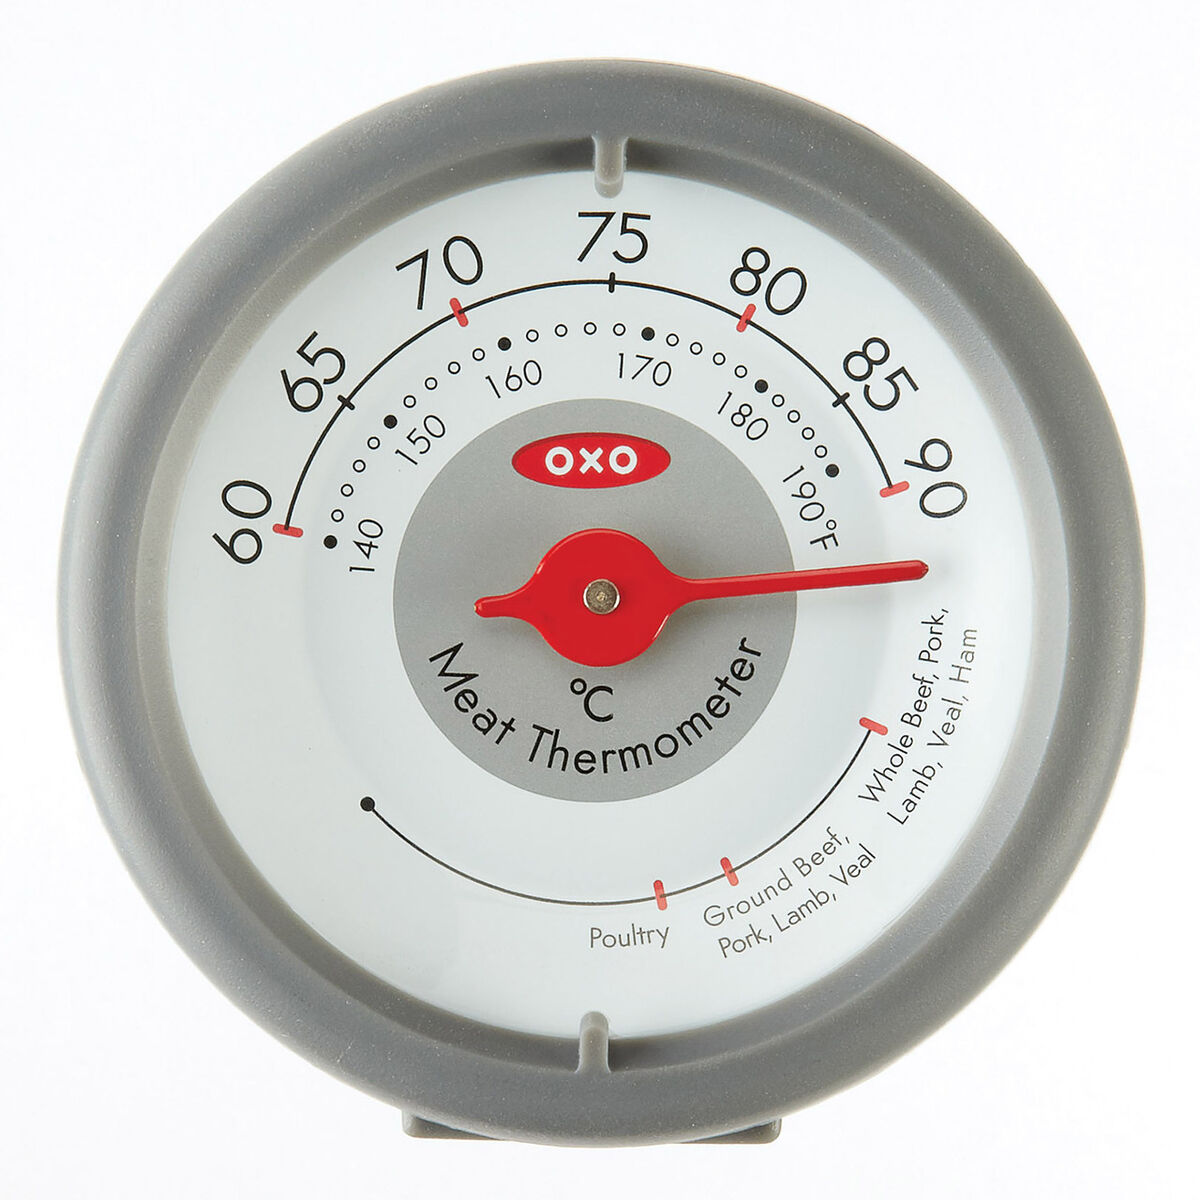 https://www.chefsessentials.com.au/content/product/regular/full/OXO_GG_ANALOG_LEAVE-IN_MEAT_THERMOMETER-5816-5861.jpg